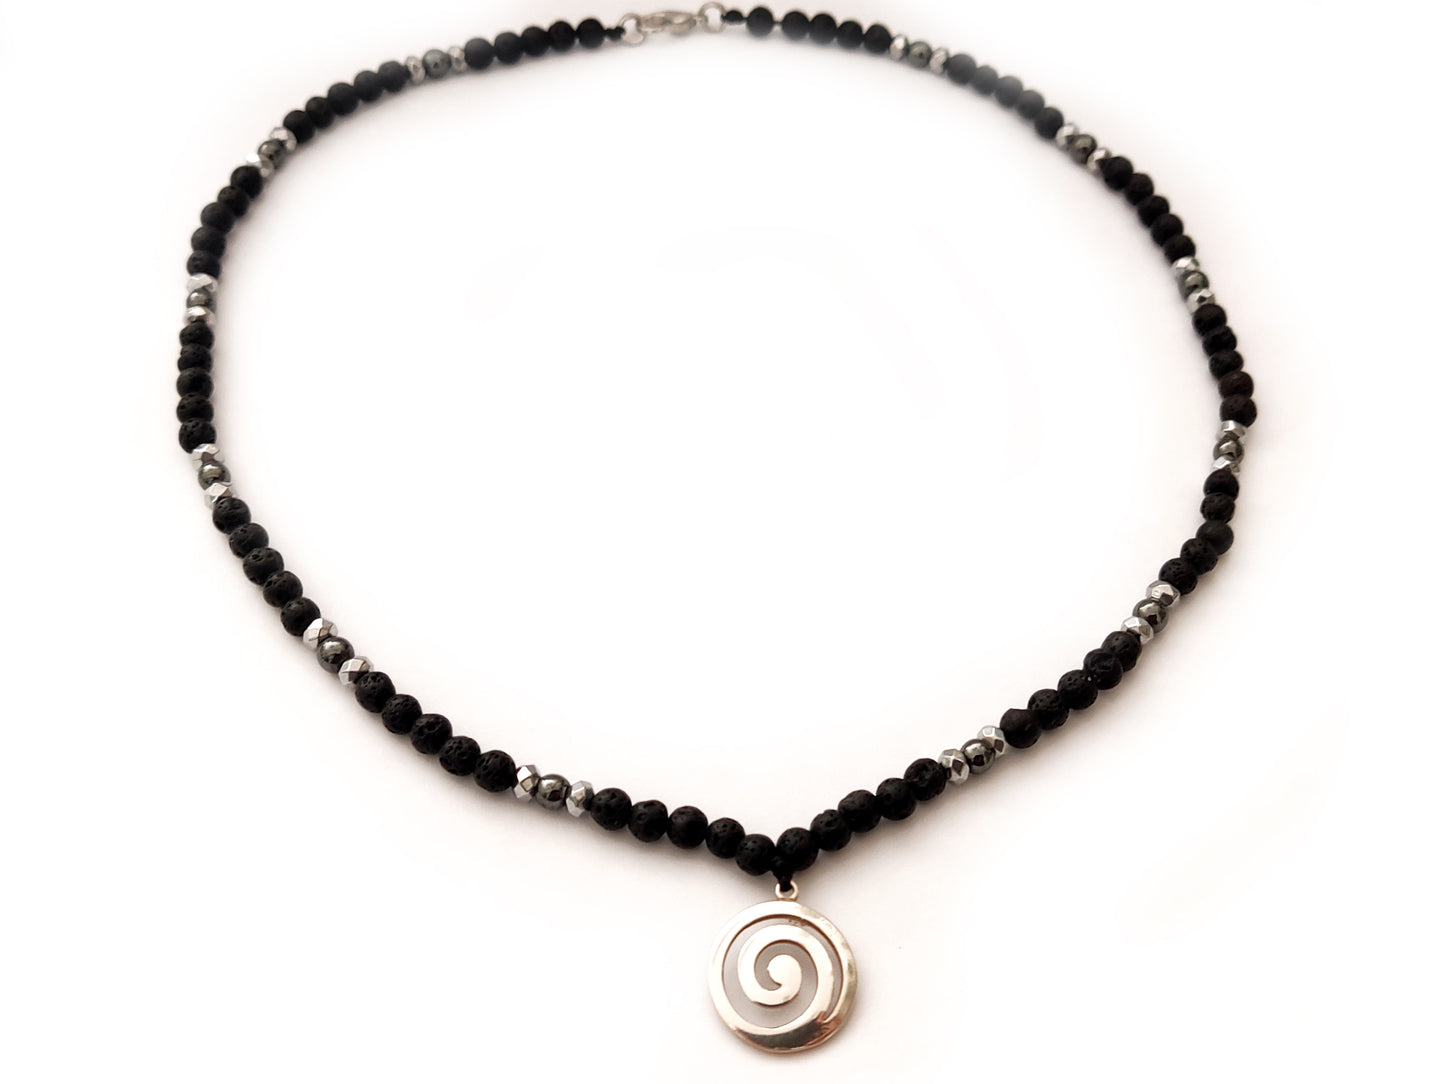 Greek Spiral Necklace | Sterling Silver 925 | Natural Volcanic Lava Stones 4mm | Sirioti Jewelry